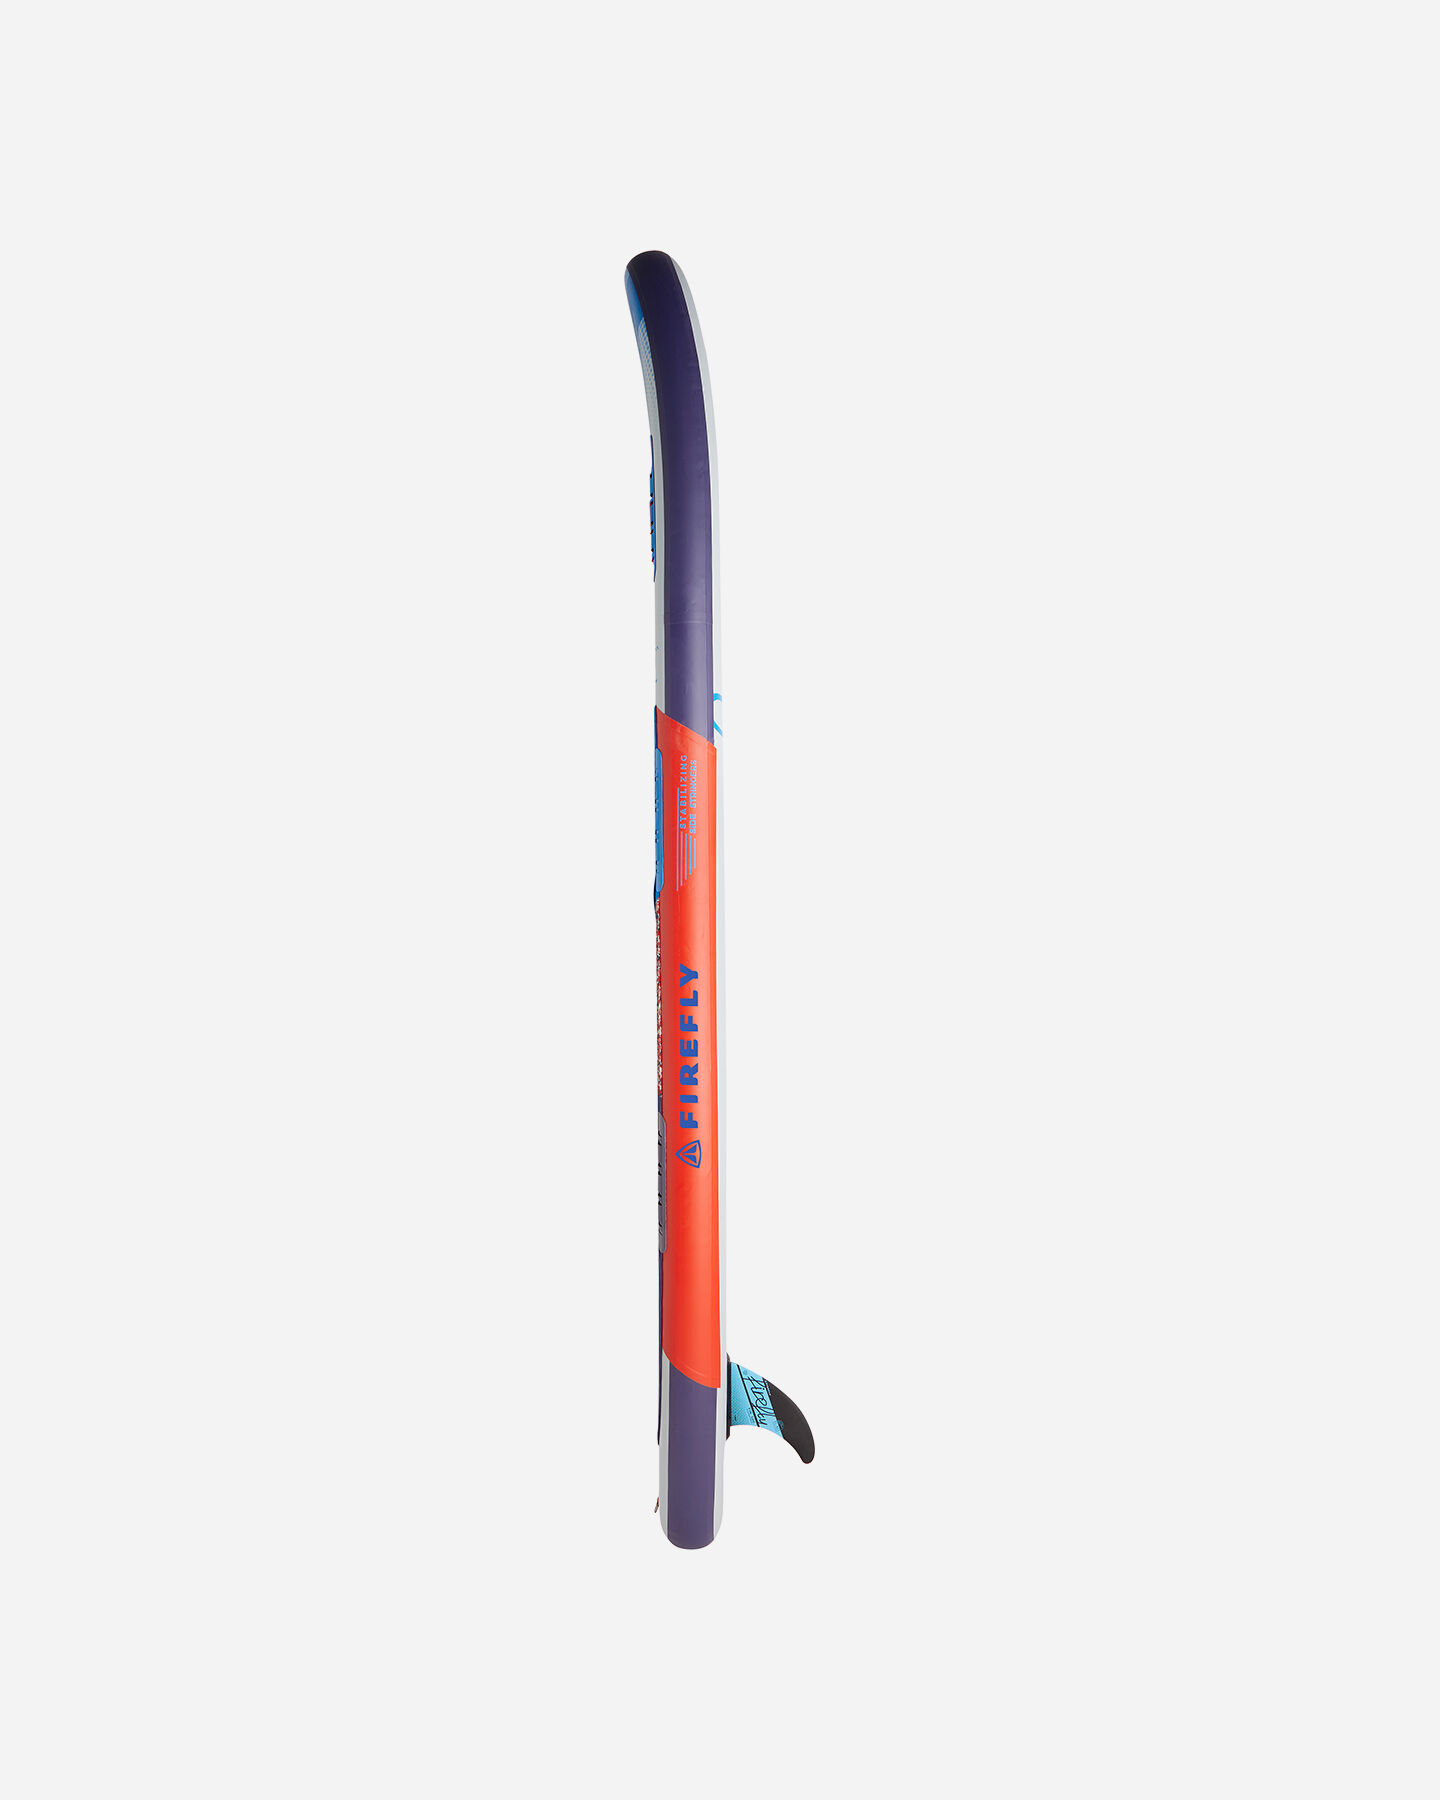  Sup FIREFLY iSUP 300 IV  S5548868|900|- scatto 1